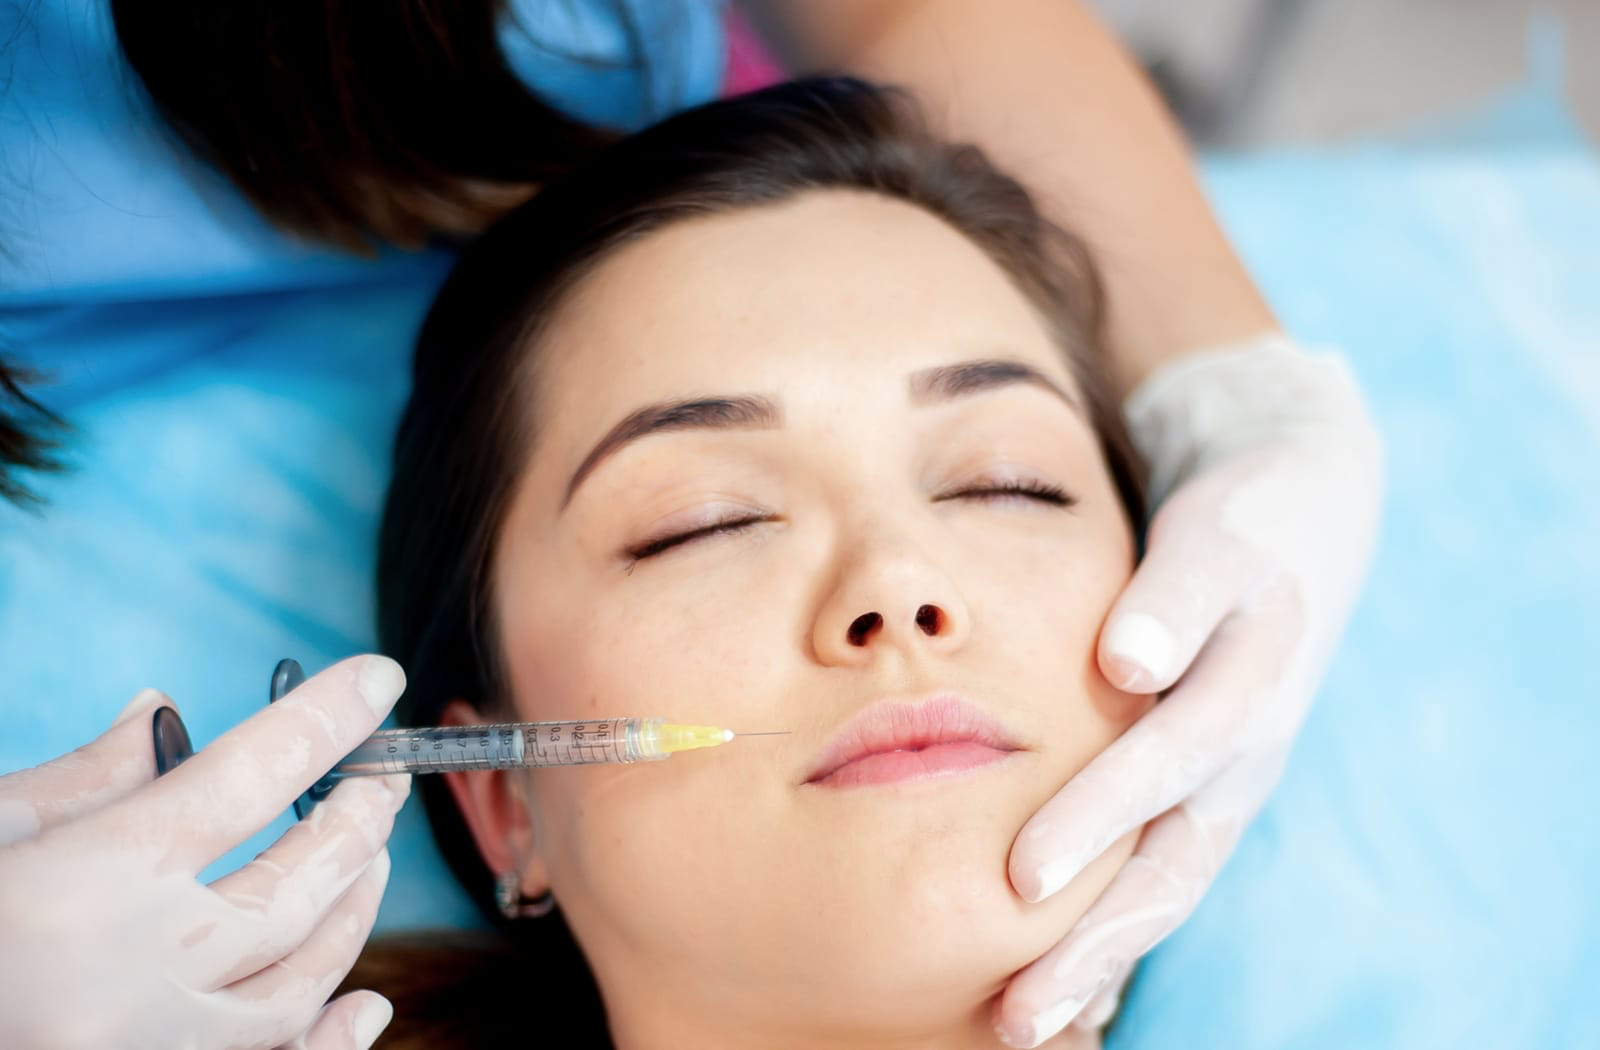 Calm woman receiving dermal fillers around her lips by gloved hands.
